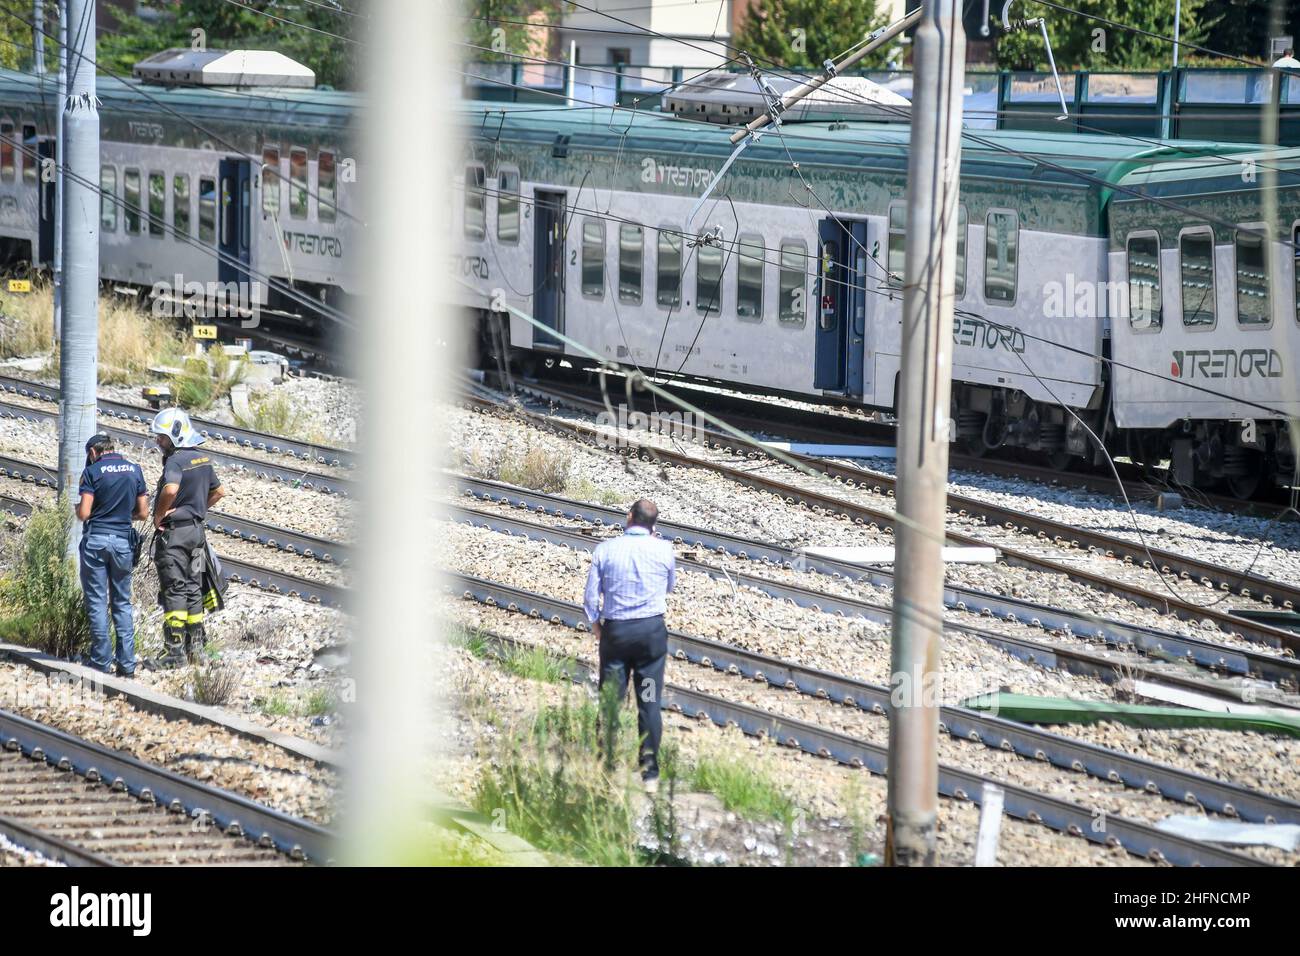 Claudio Furlan - LaPresse 19 August 2020 Carnate (Italy) news Trenord train derailment at Carnate - Usmate station on the Milan - Lecco line Stock Photo